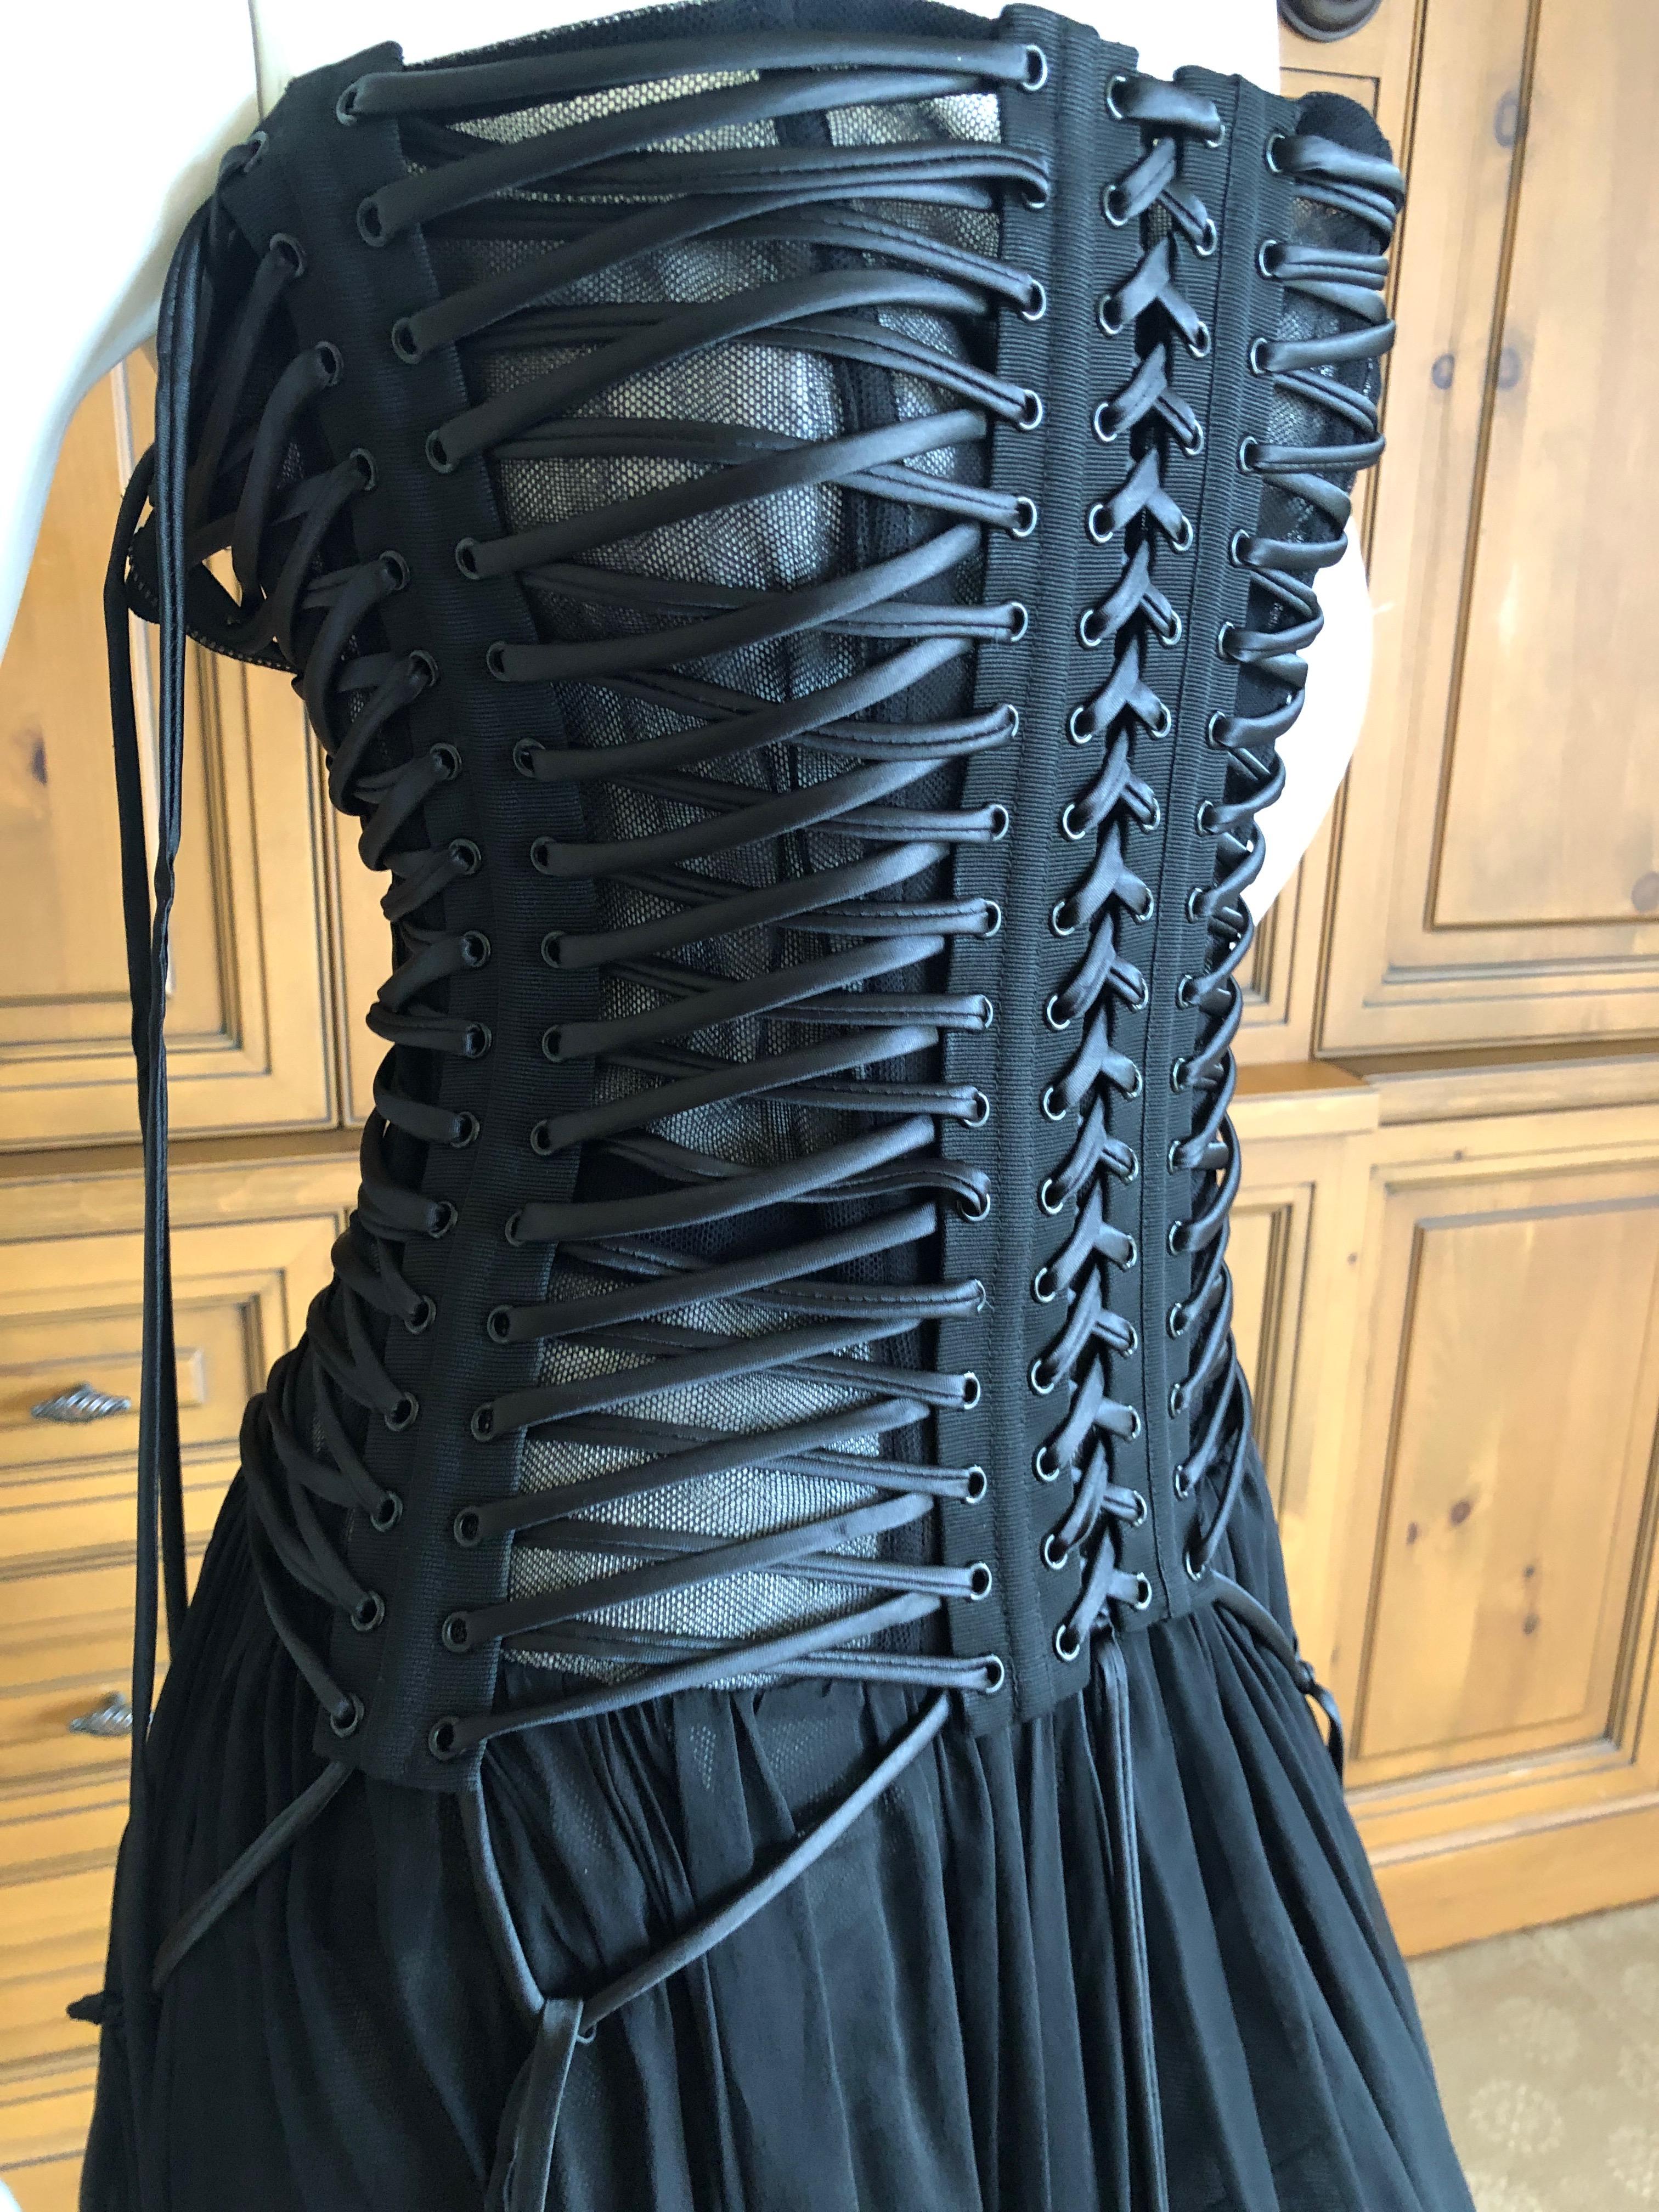 Women's Dolce & Gabbana Daring Lace Up Corset Dress New with Tags $3295 Size 44 For Sale